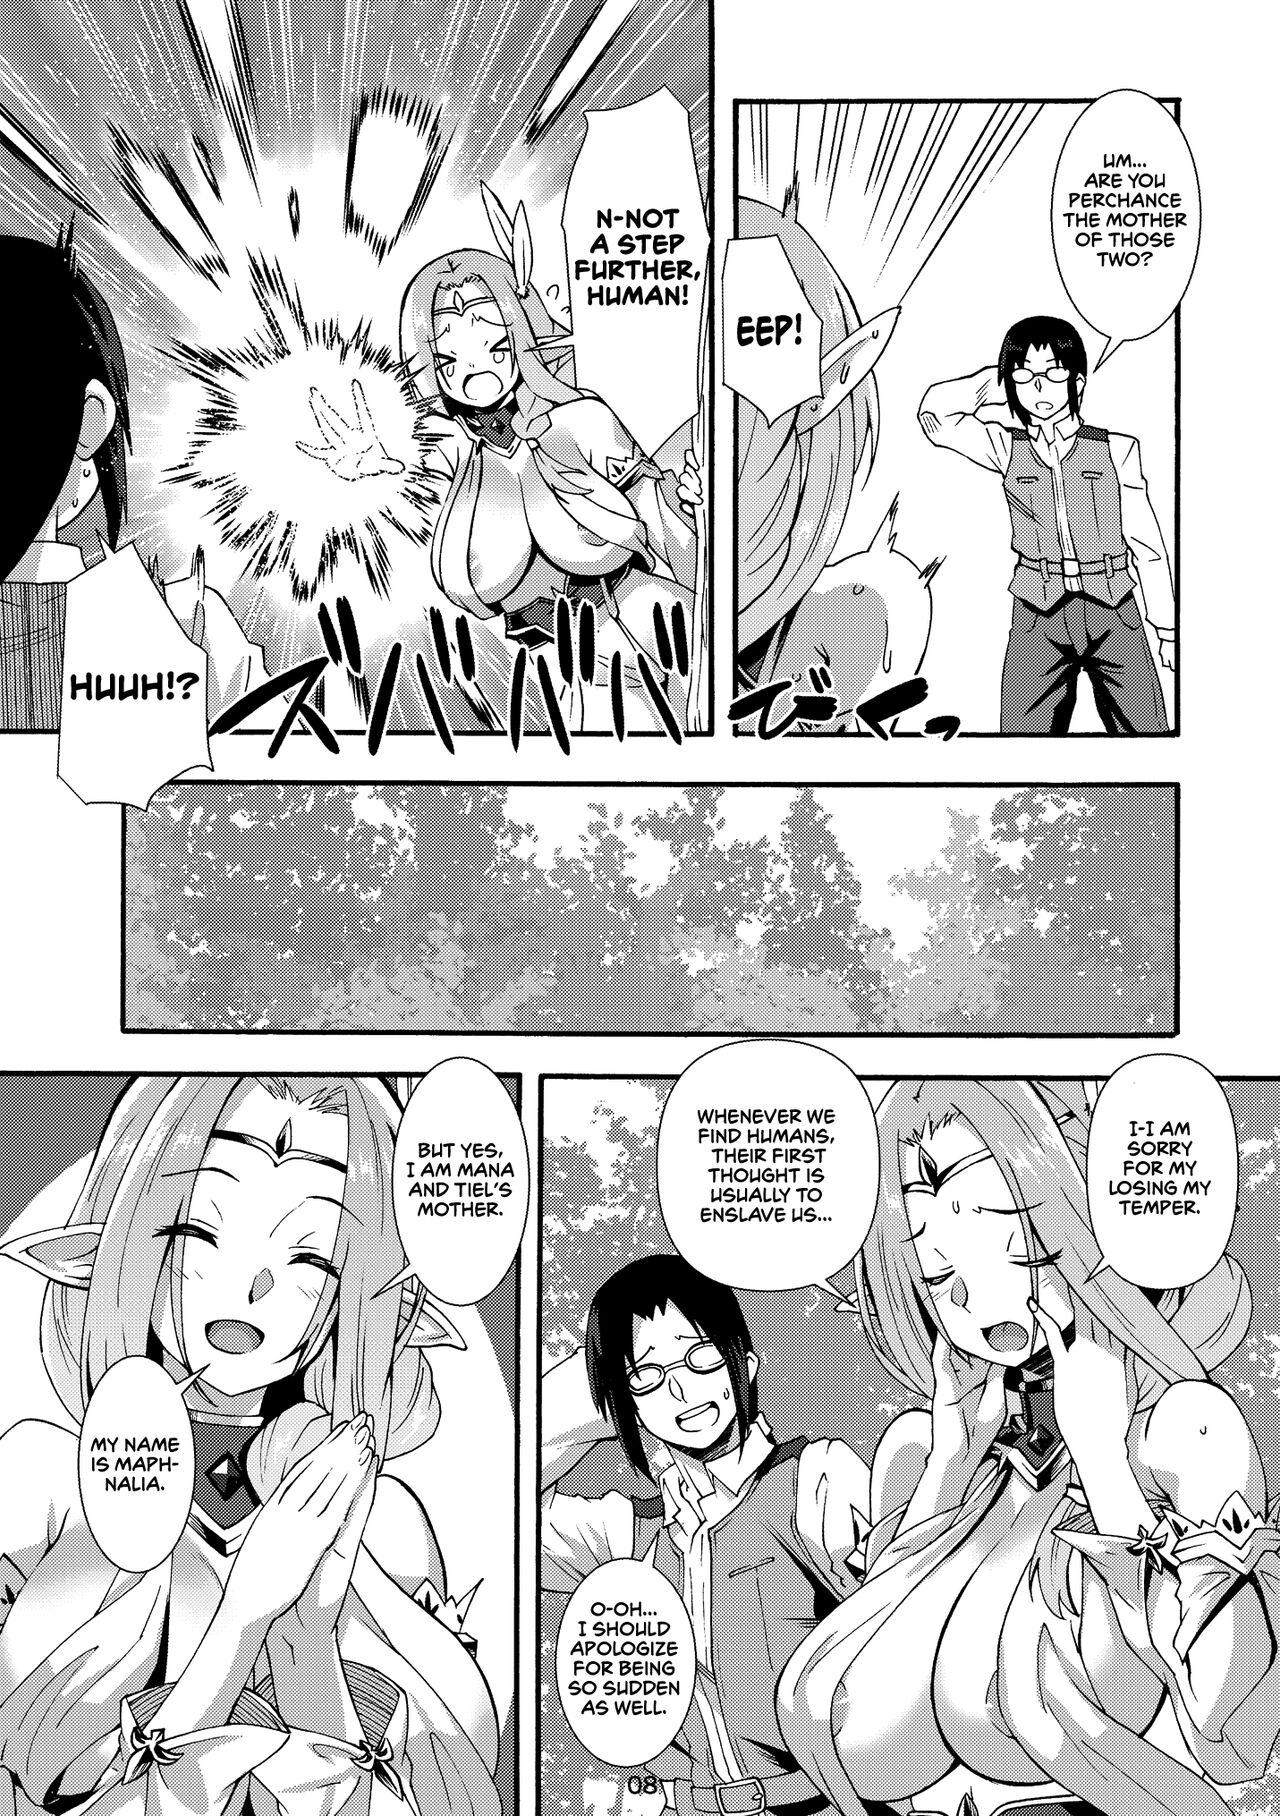 Lolicon Sukebe Elf Tanbouki 3 | Records of the Search for the Lustful Elves 3 - Original Suruba - Page 8